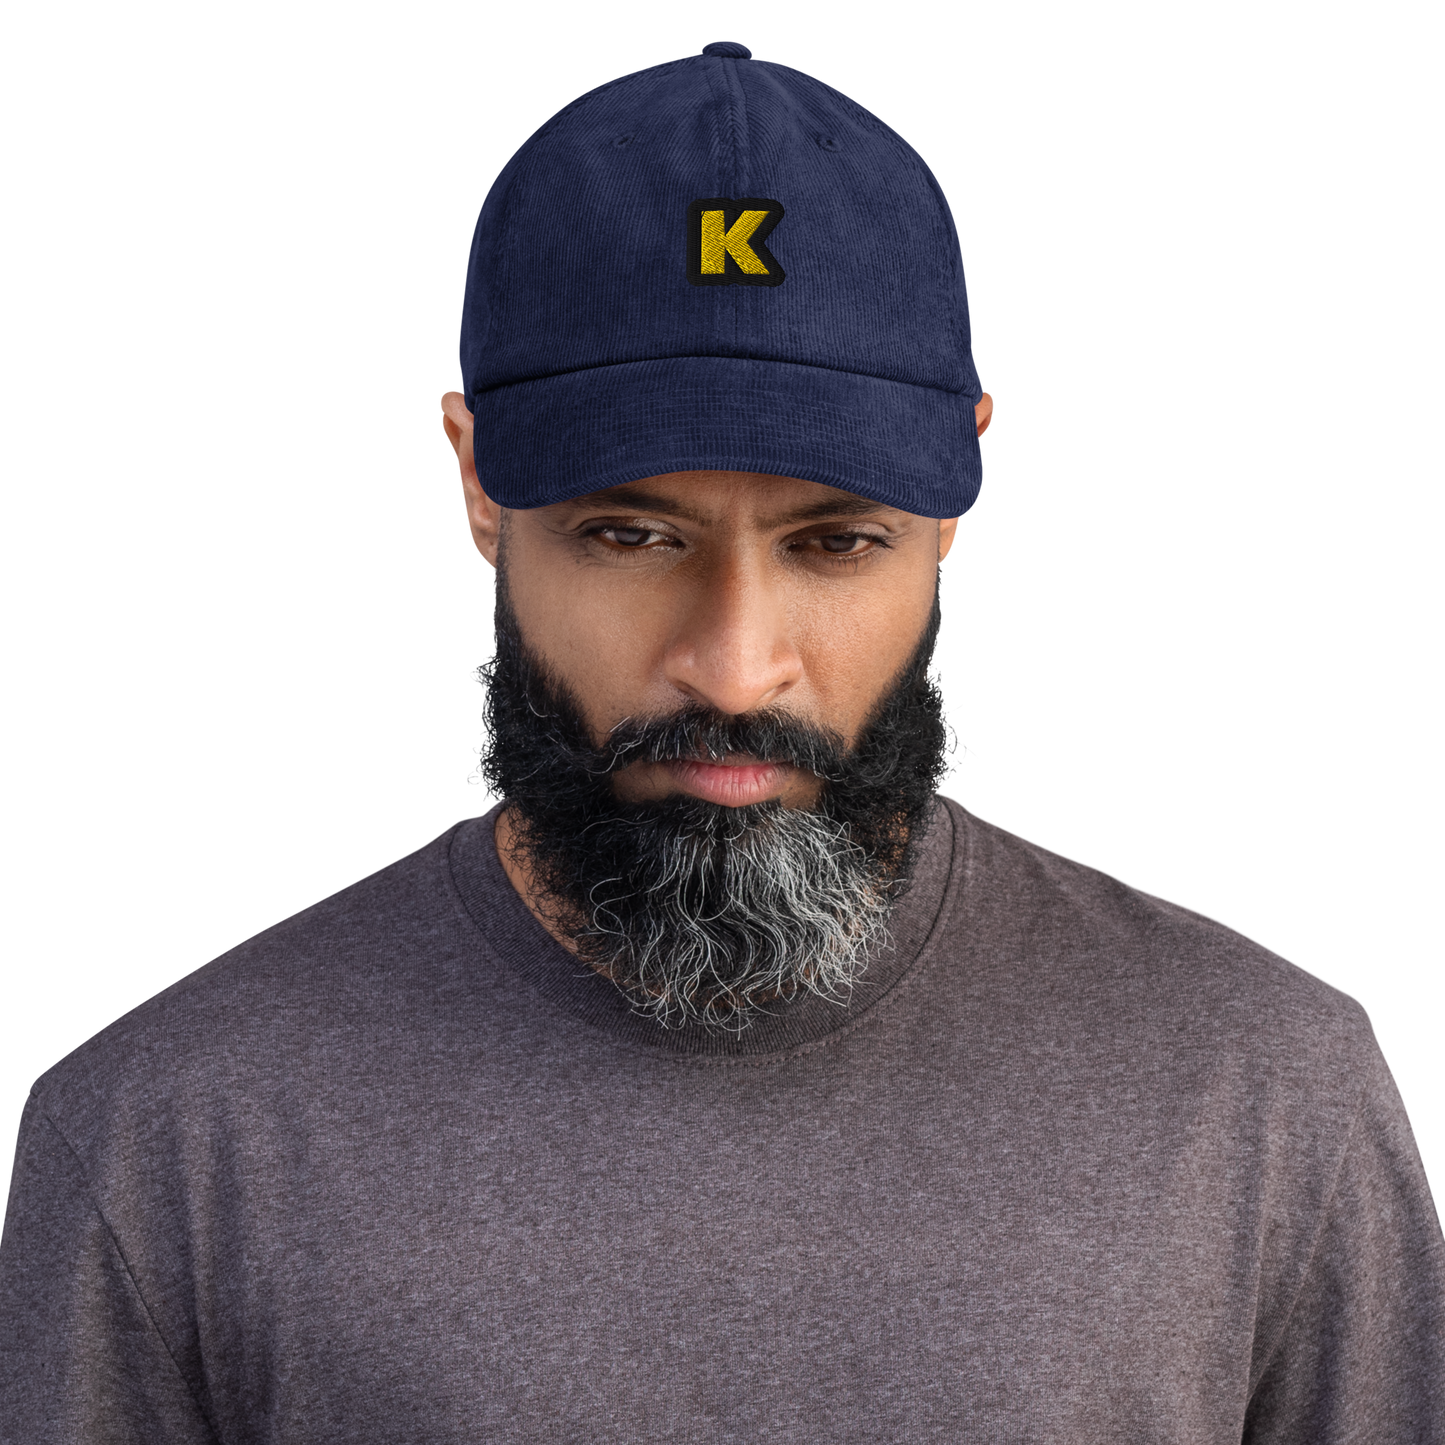 K - The letter collection - Corduroy hat